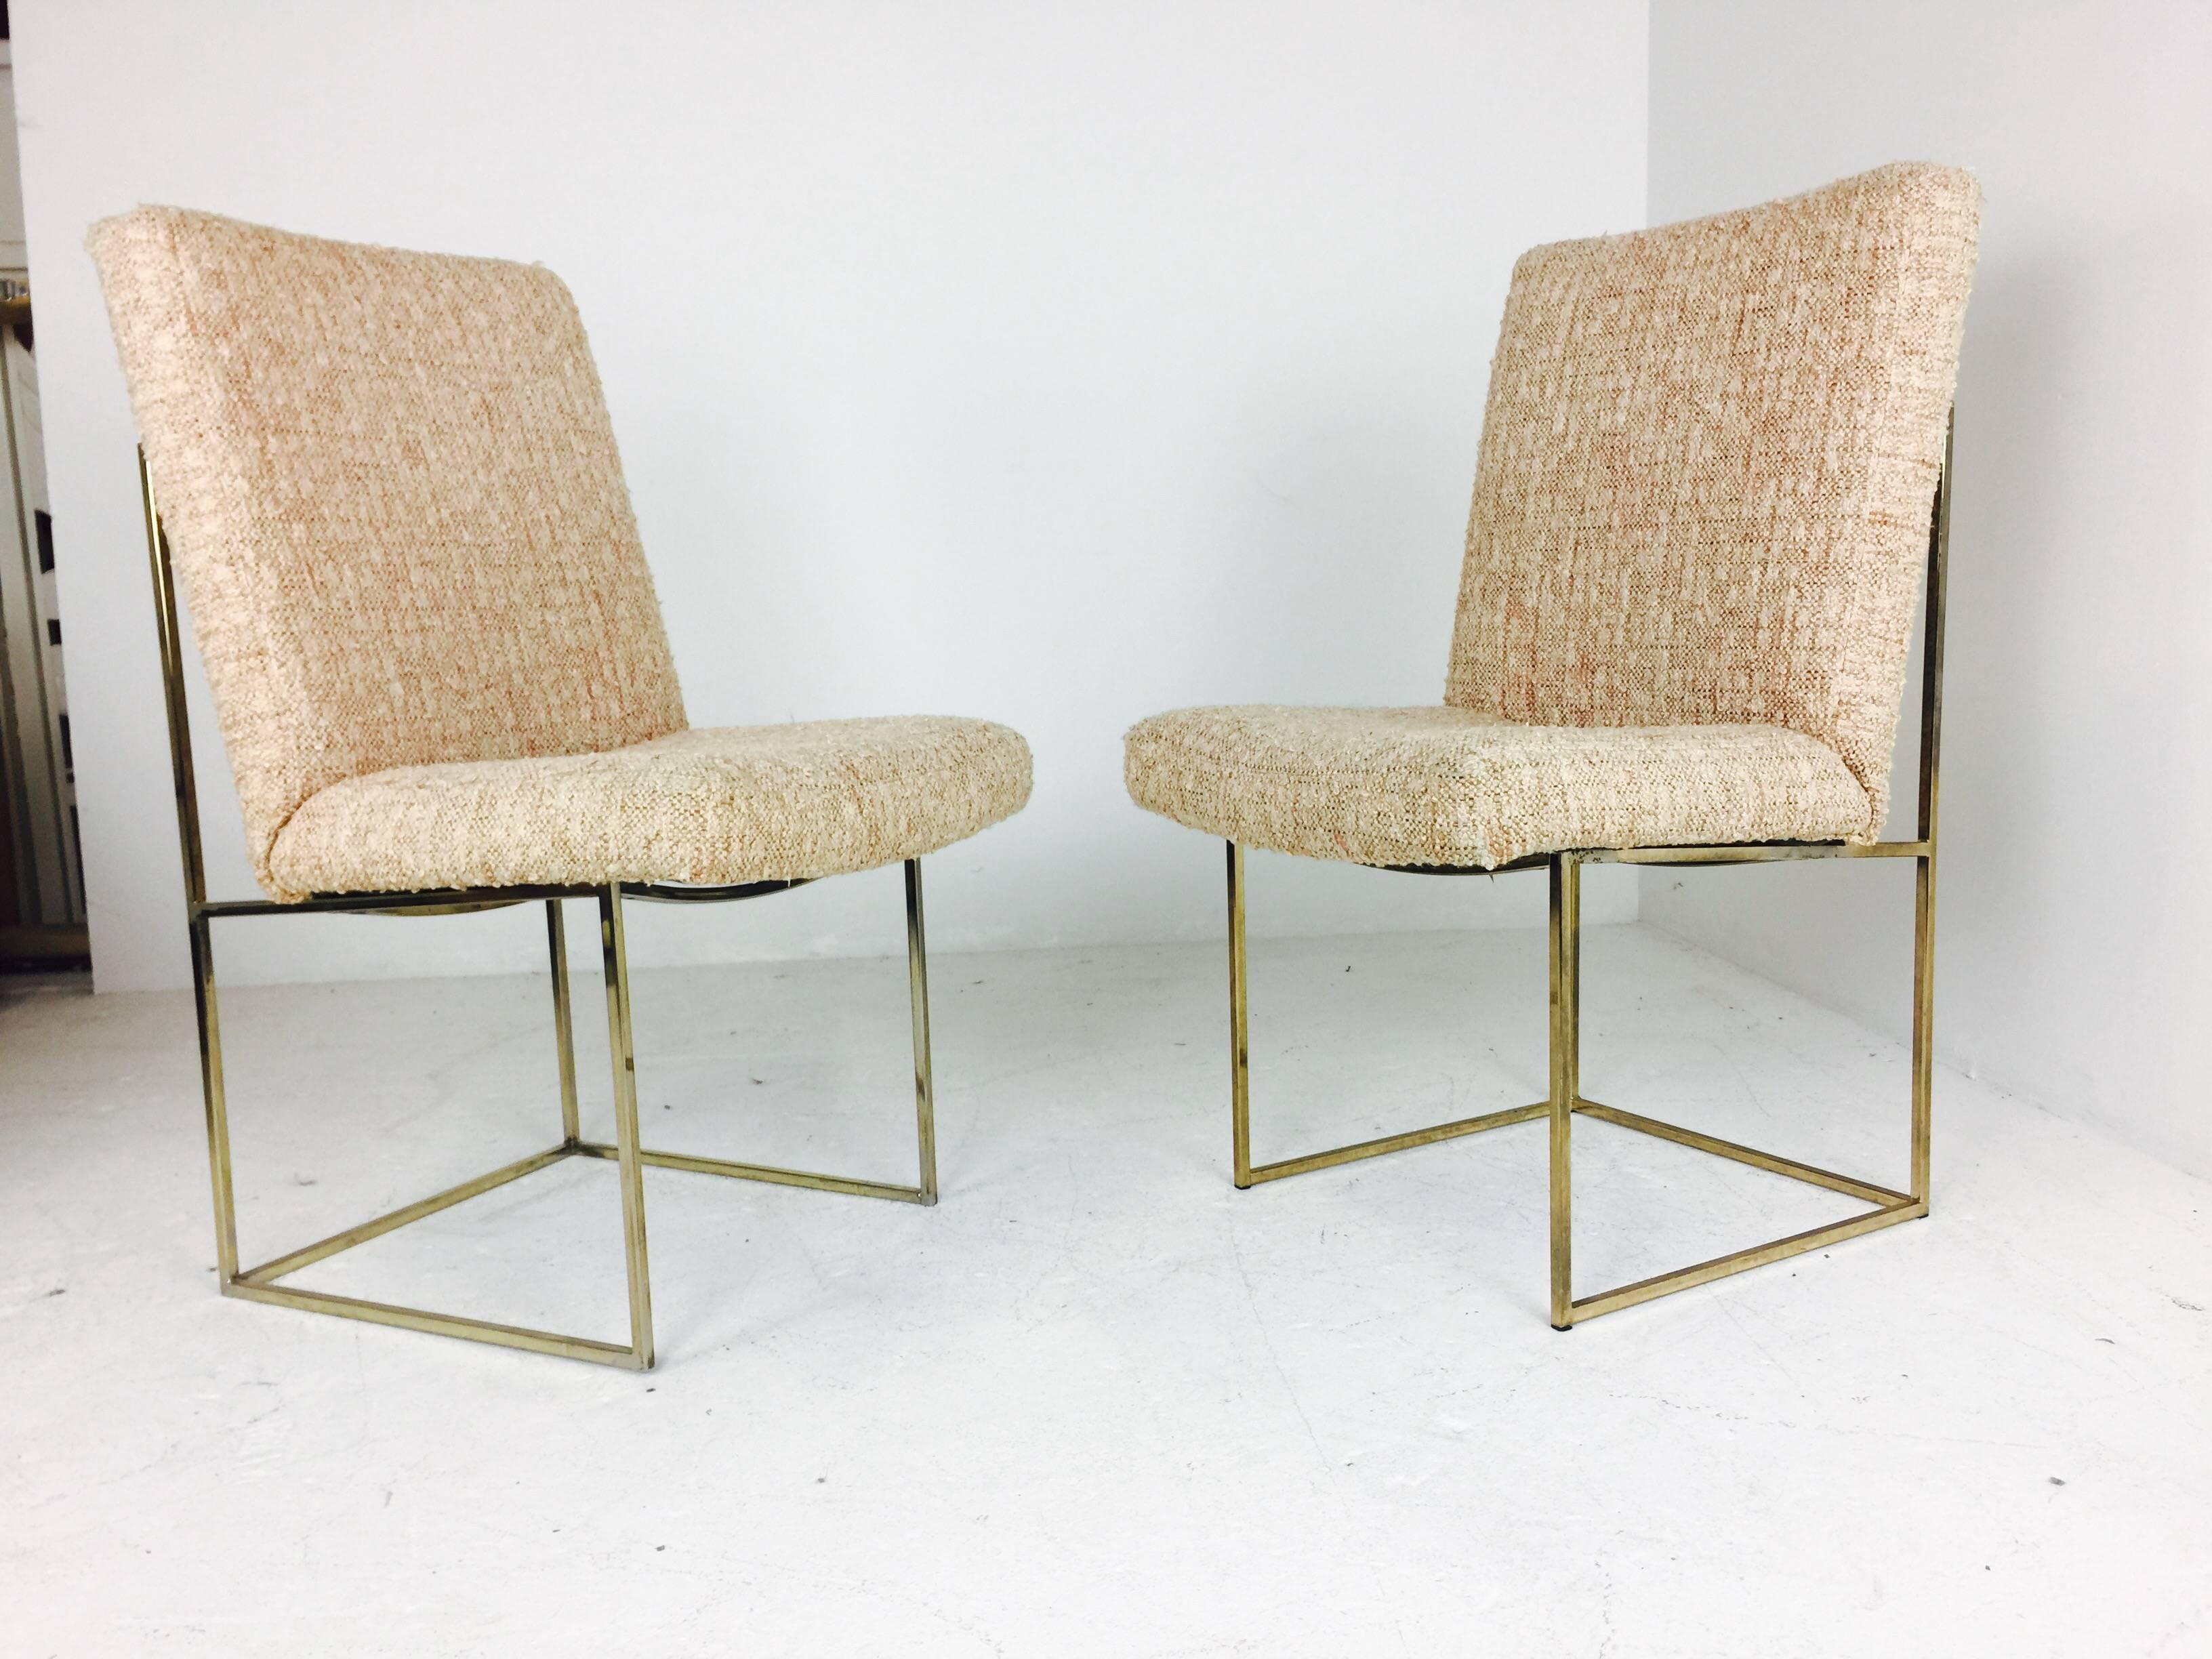 Pair of Milo Baughman brass dining chairs with original textured fabric. Refinishing and upholstery recommended, circa 1970s.

Dimensions: 23" W x 20.5" D x 36" T.
seat height 18".